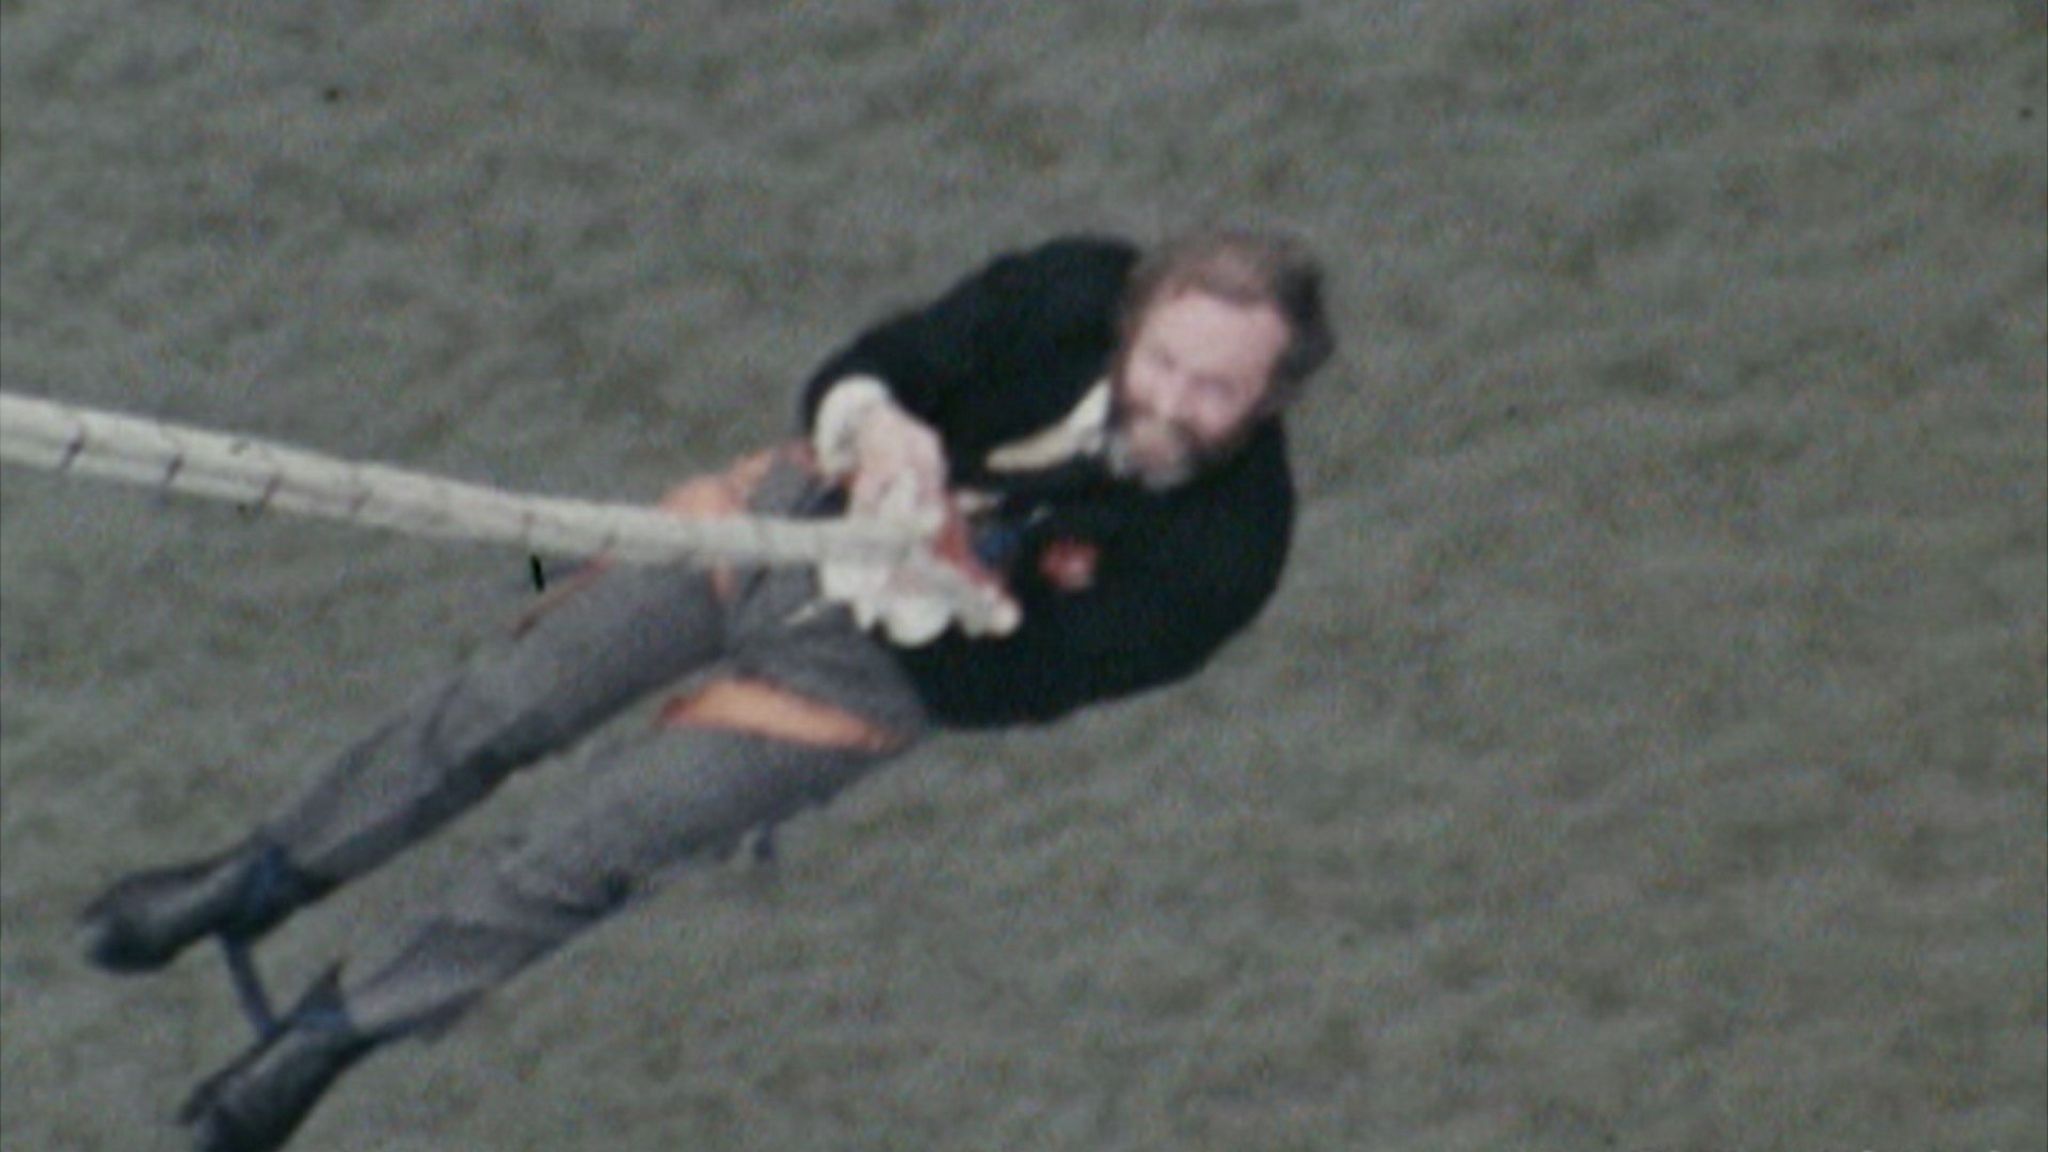 David Kirke hanging from a rope in a blurry shot